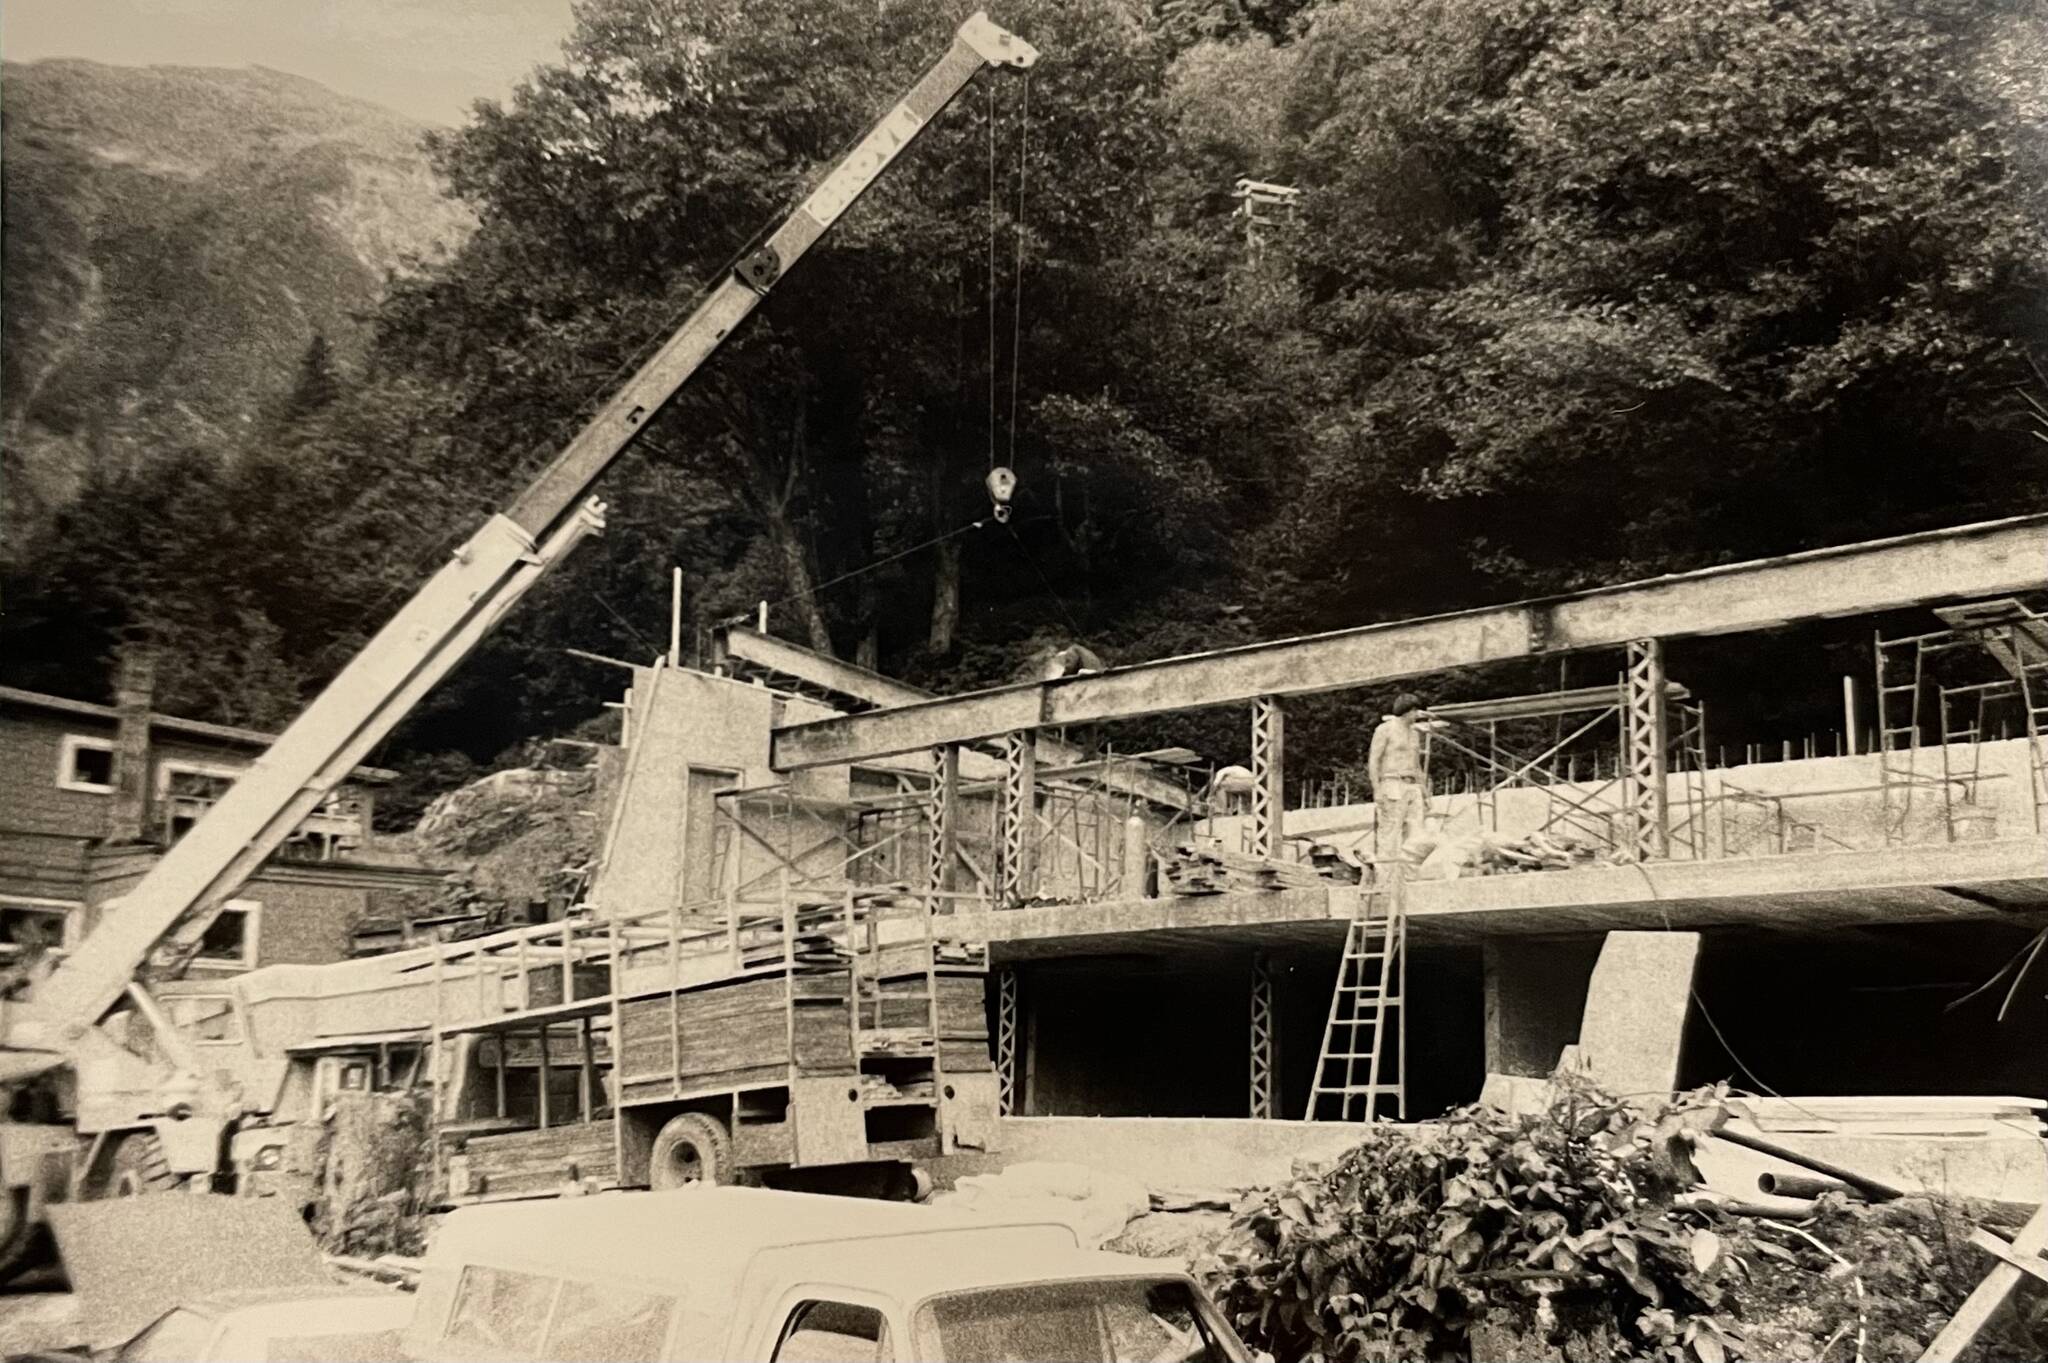 Construction in 1983 of Nancy Waterman and Bill Leighty’s downtown Juneau home using recycling steel from the 1935 Douglas Bridge. (Photo courtesy of Nancy Waterman and Bill Leighty)